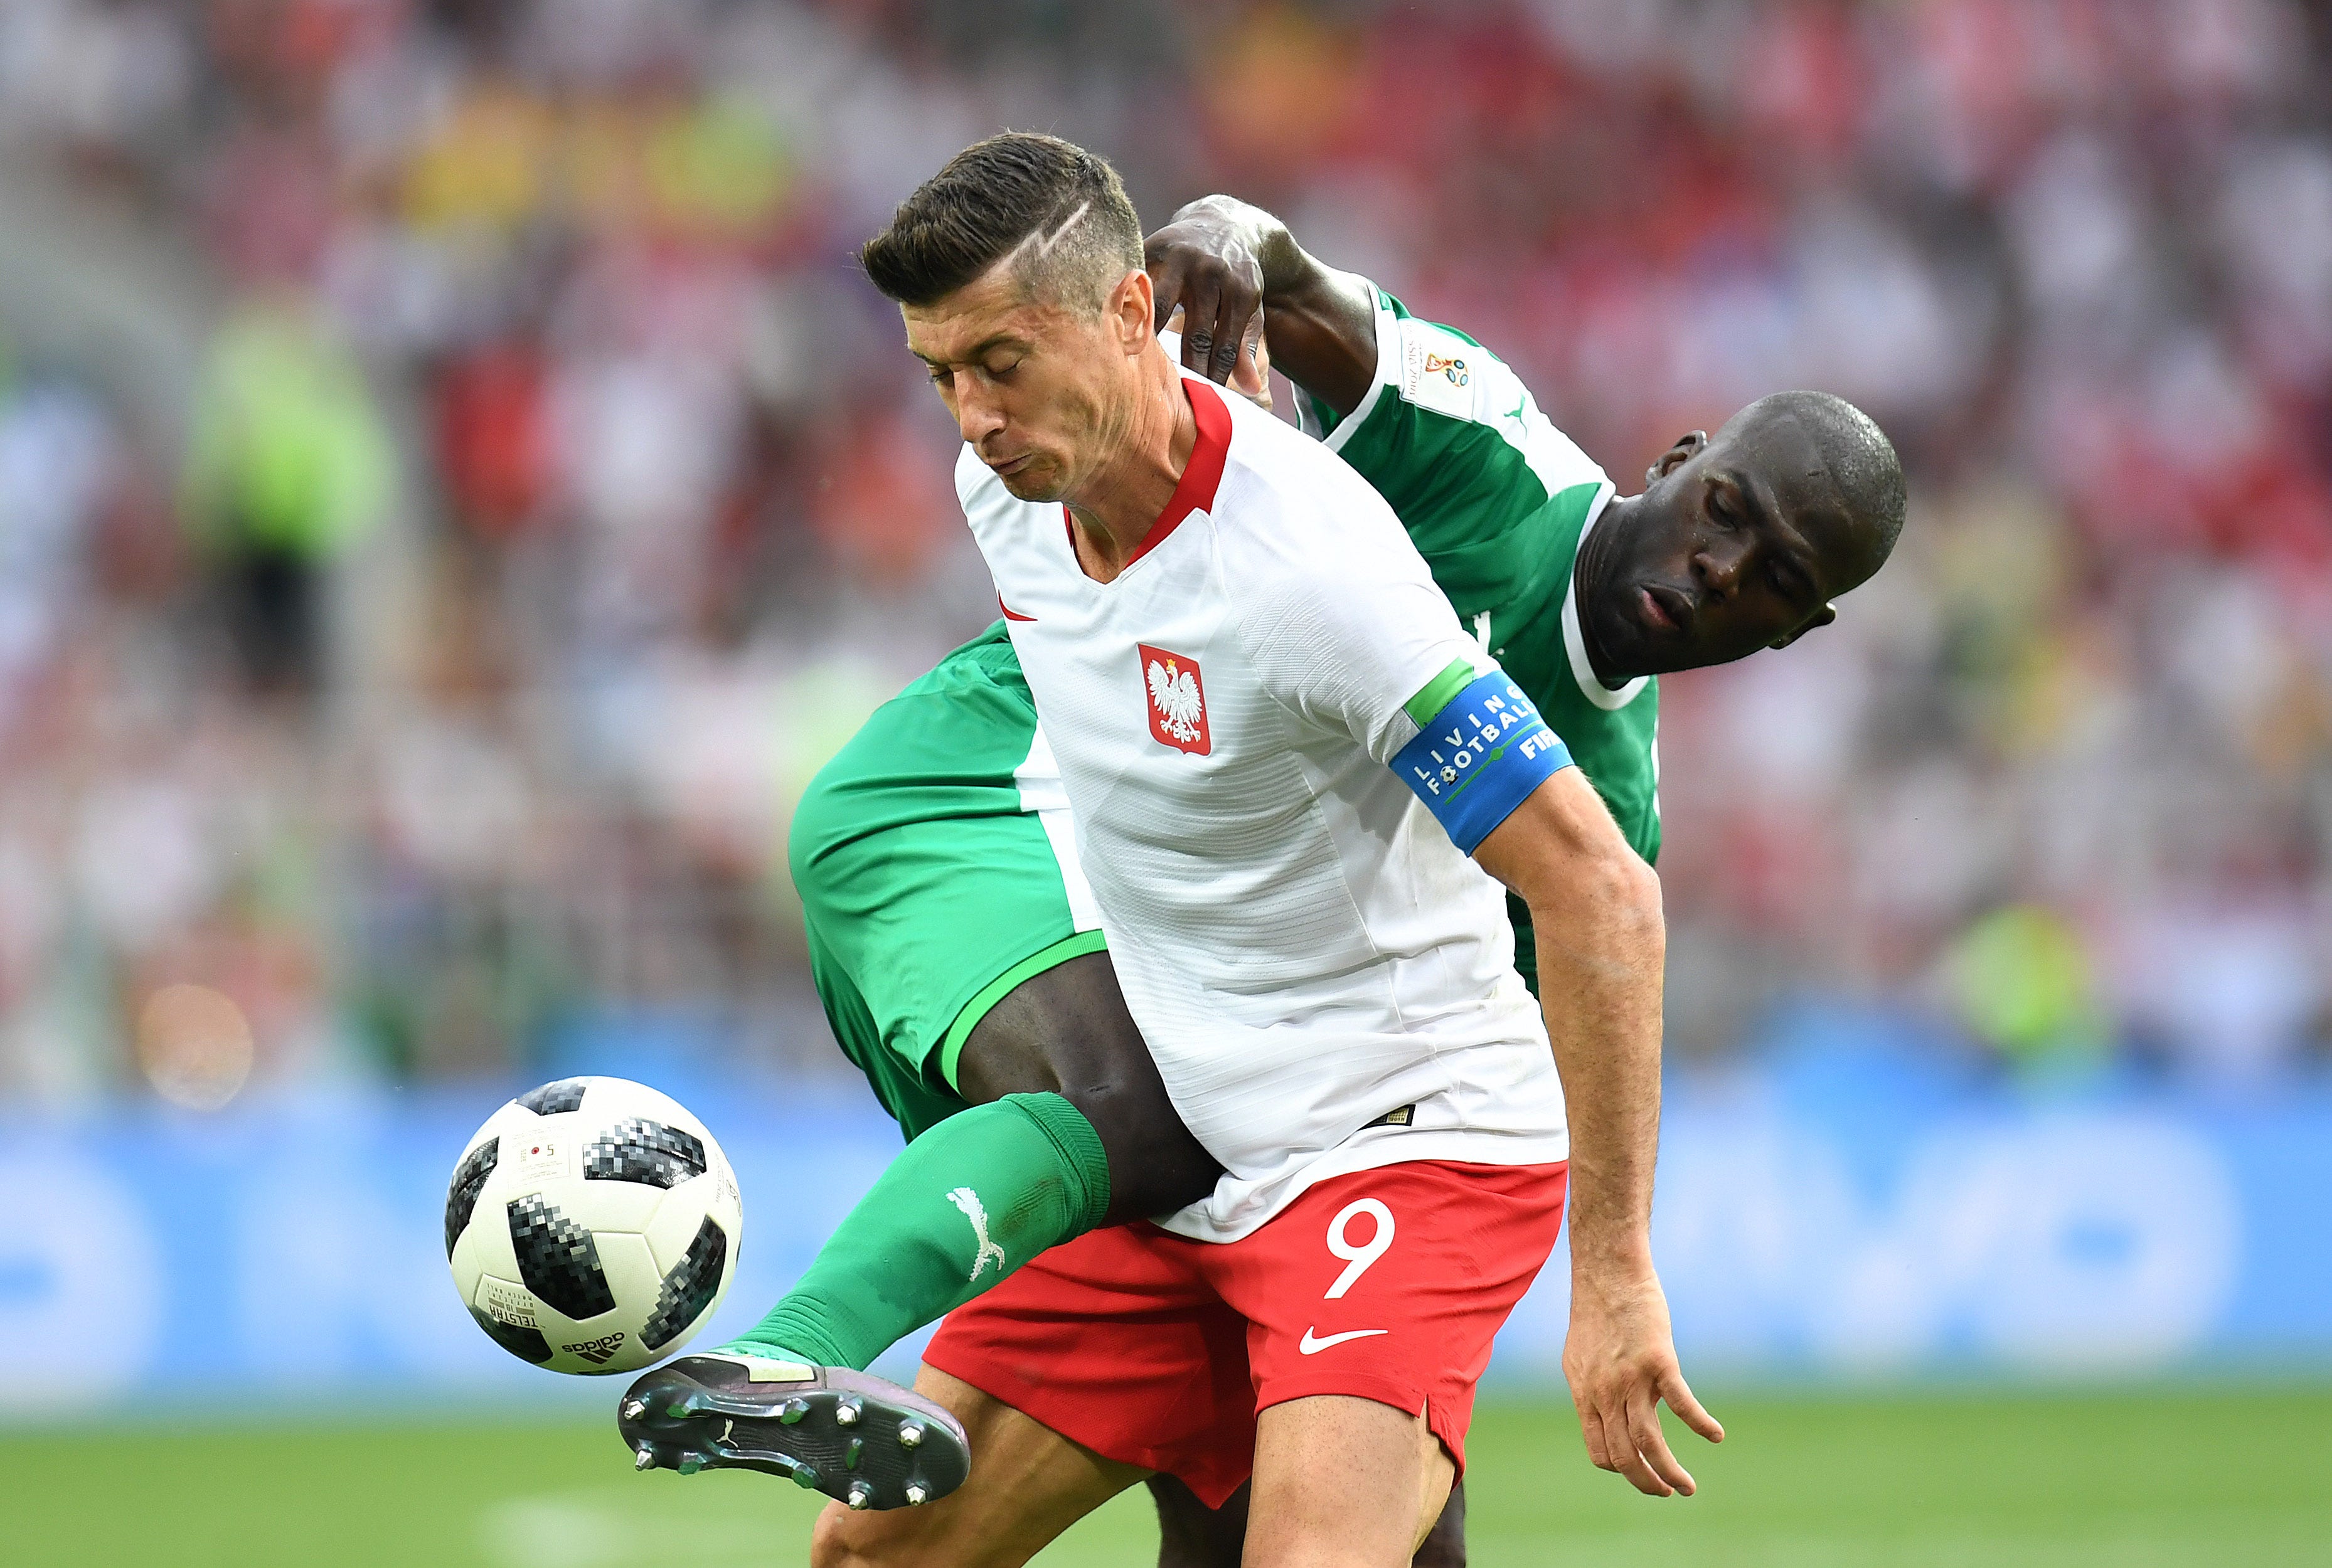 Polish forward Robert Lewandowski battles for the ball with Senegal defender Kalidou Koulibaly in Group H play during the FIFA World Cup 2018 at Spartak Stadium in Moscow.